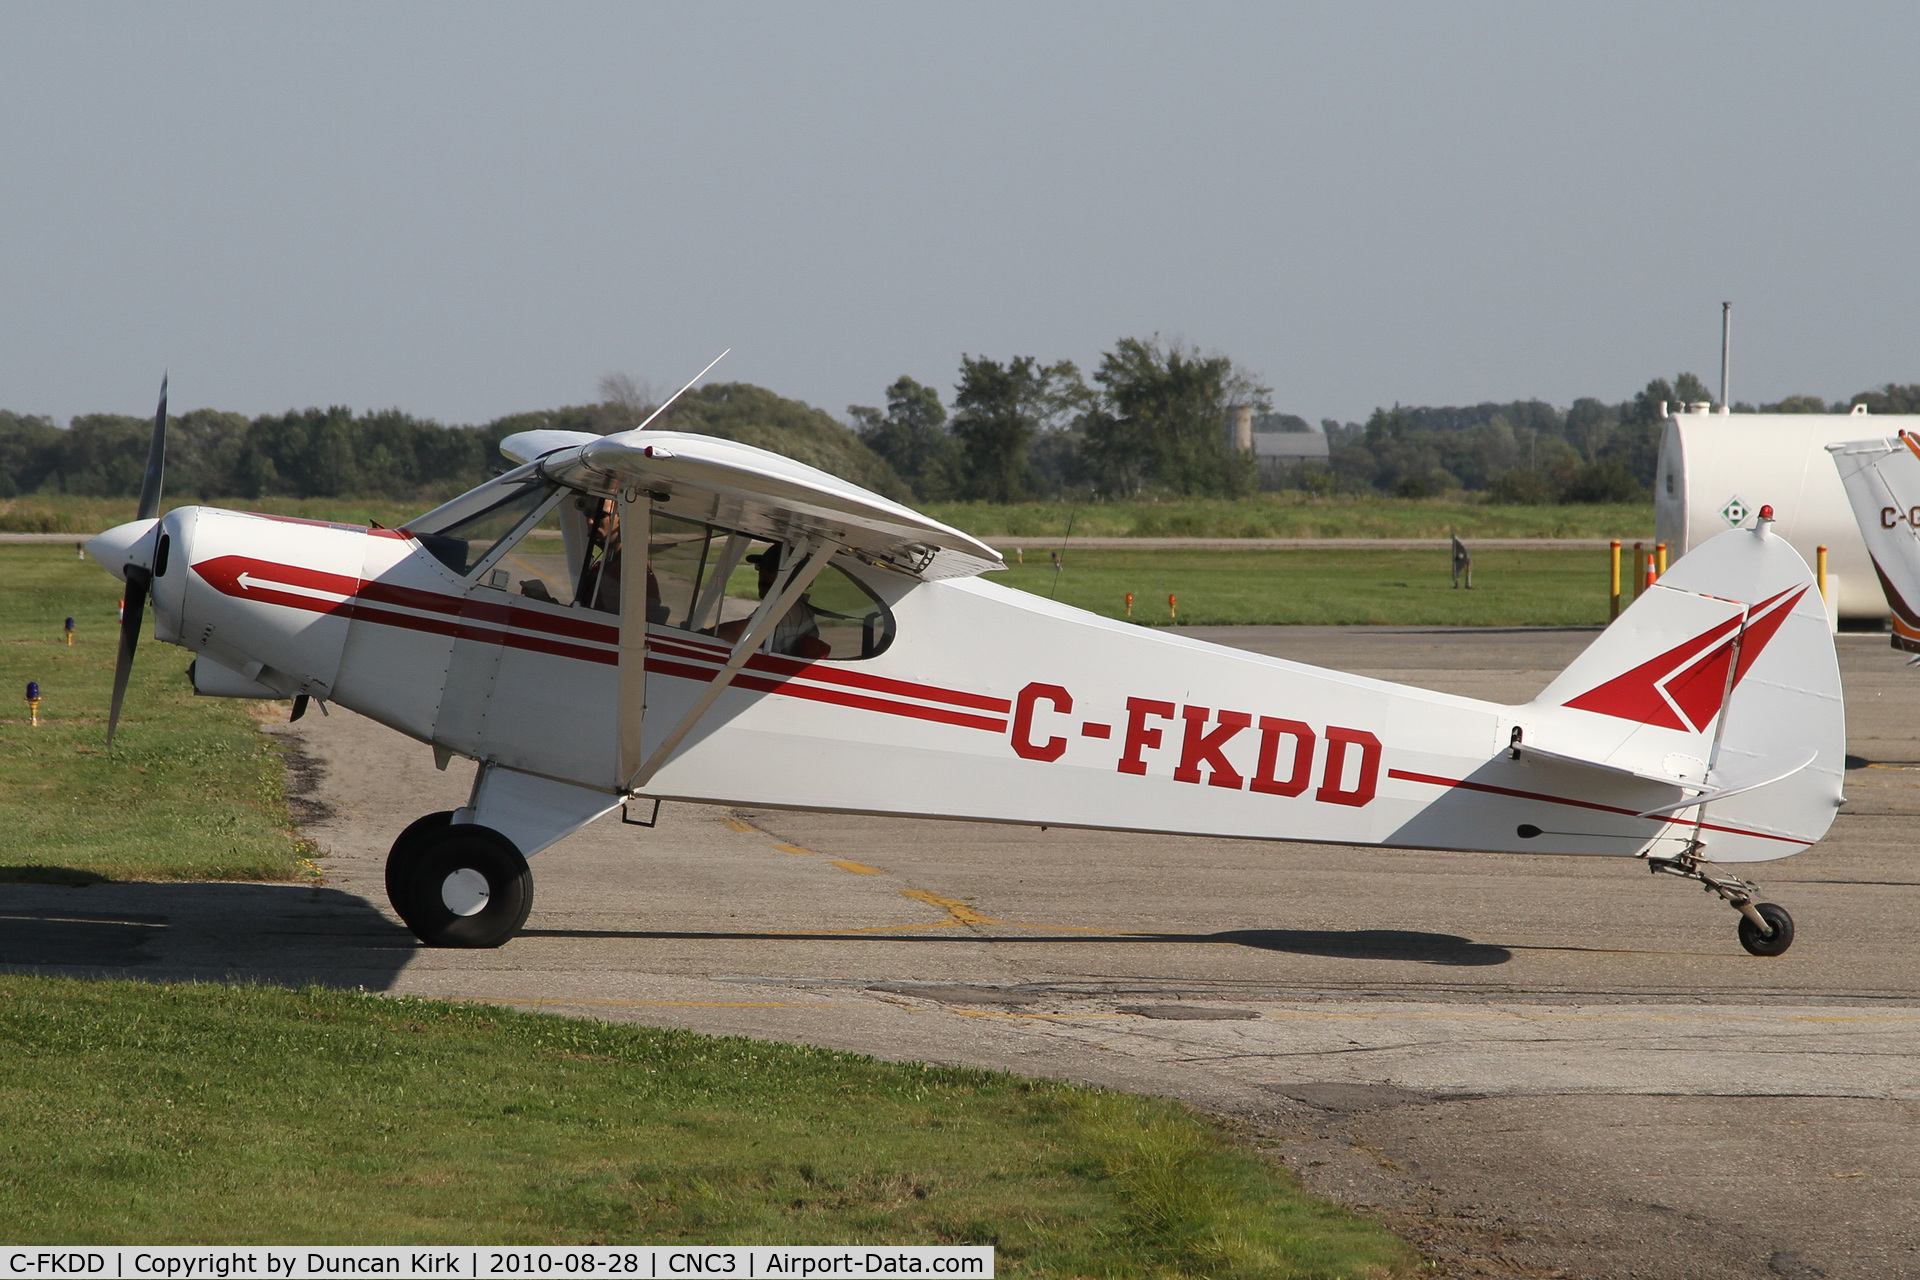 C-FKDD, 1975 Piper PA-18-150 Super Cub C/N 18-7509015, Great day to take the Cub up!